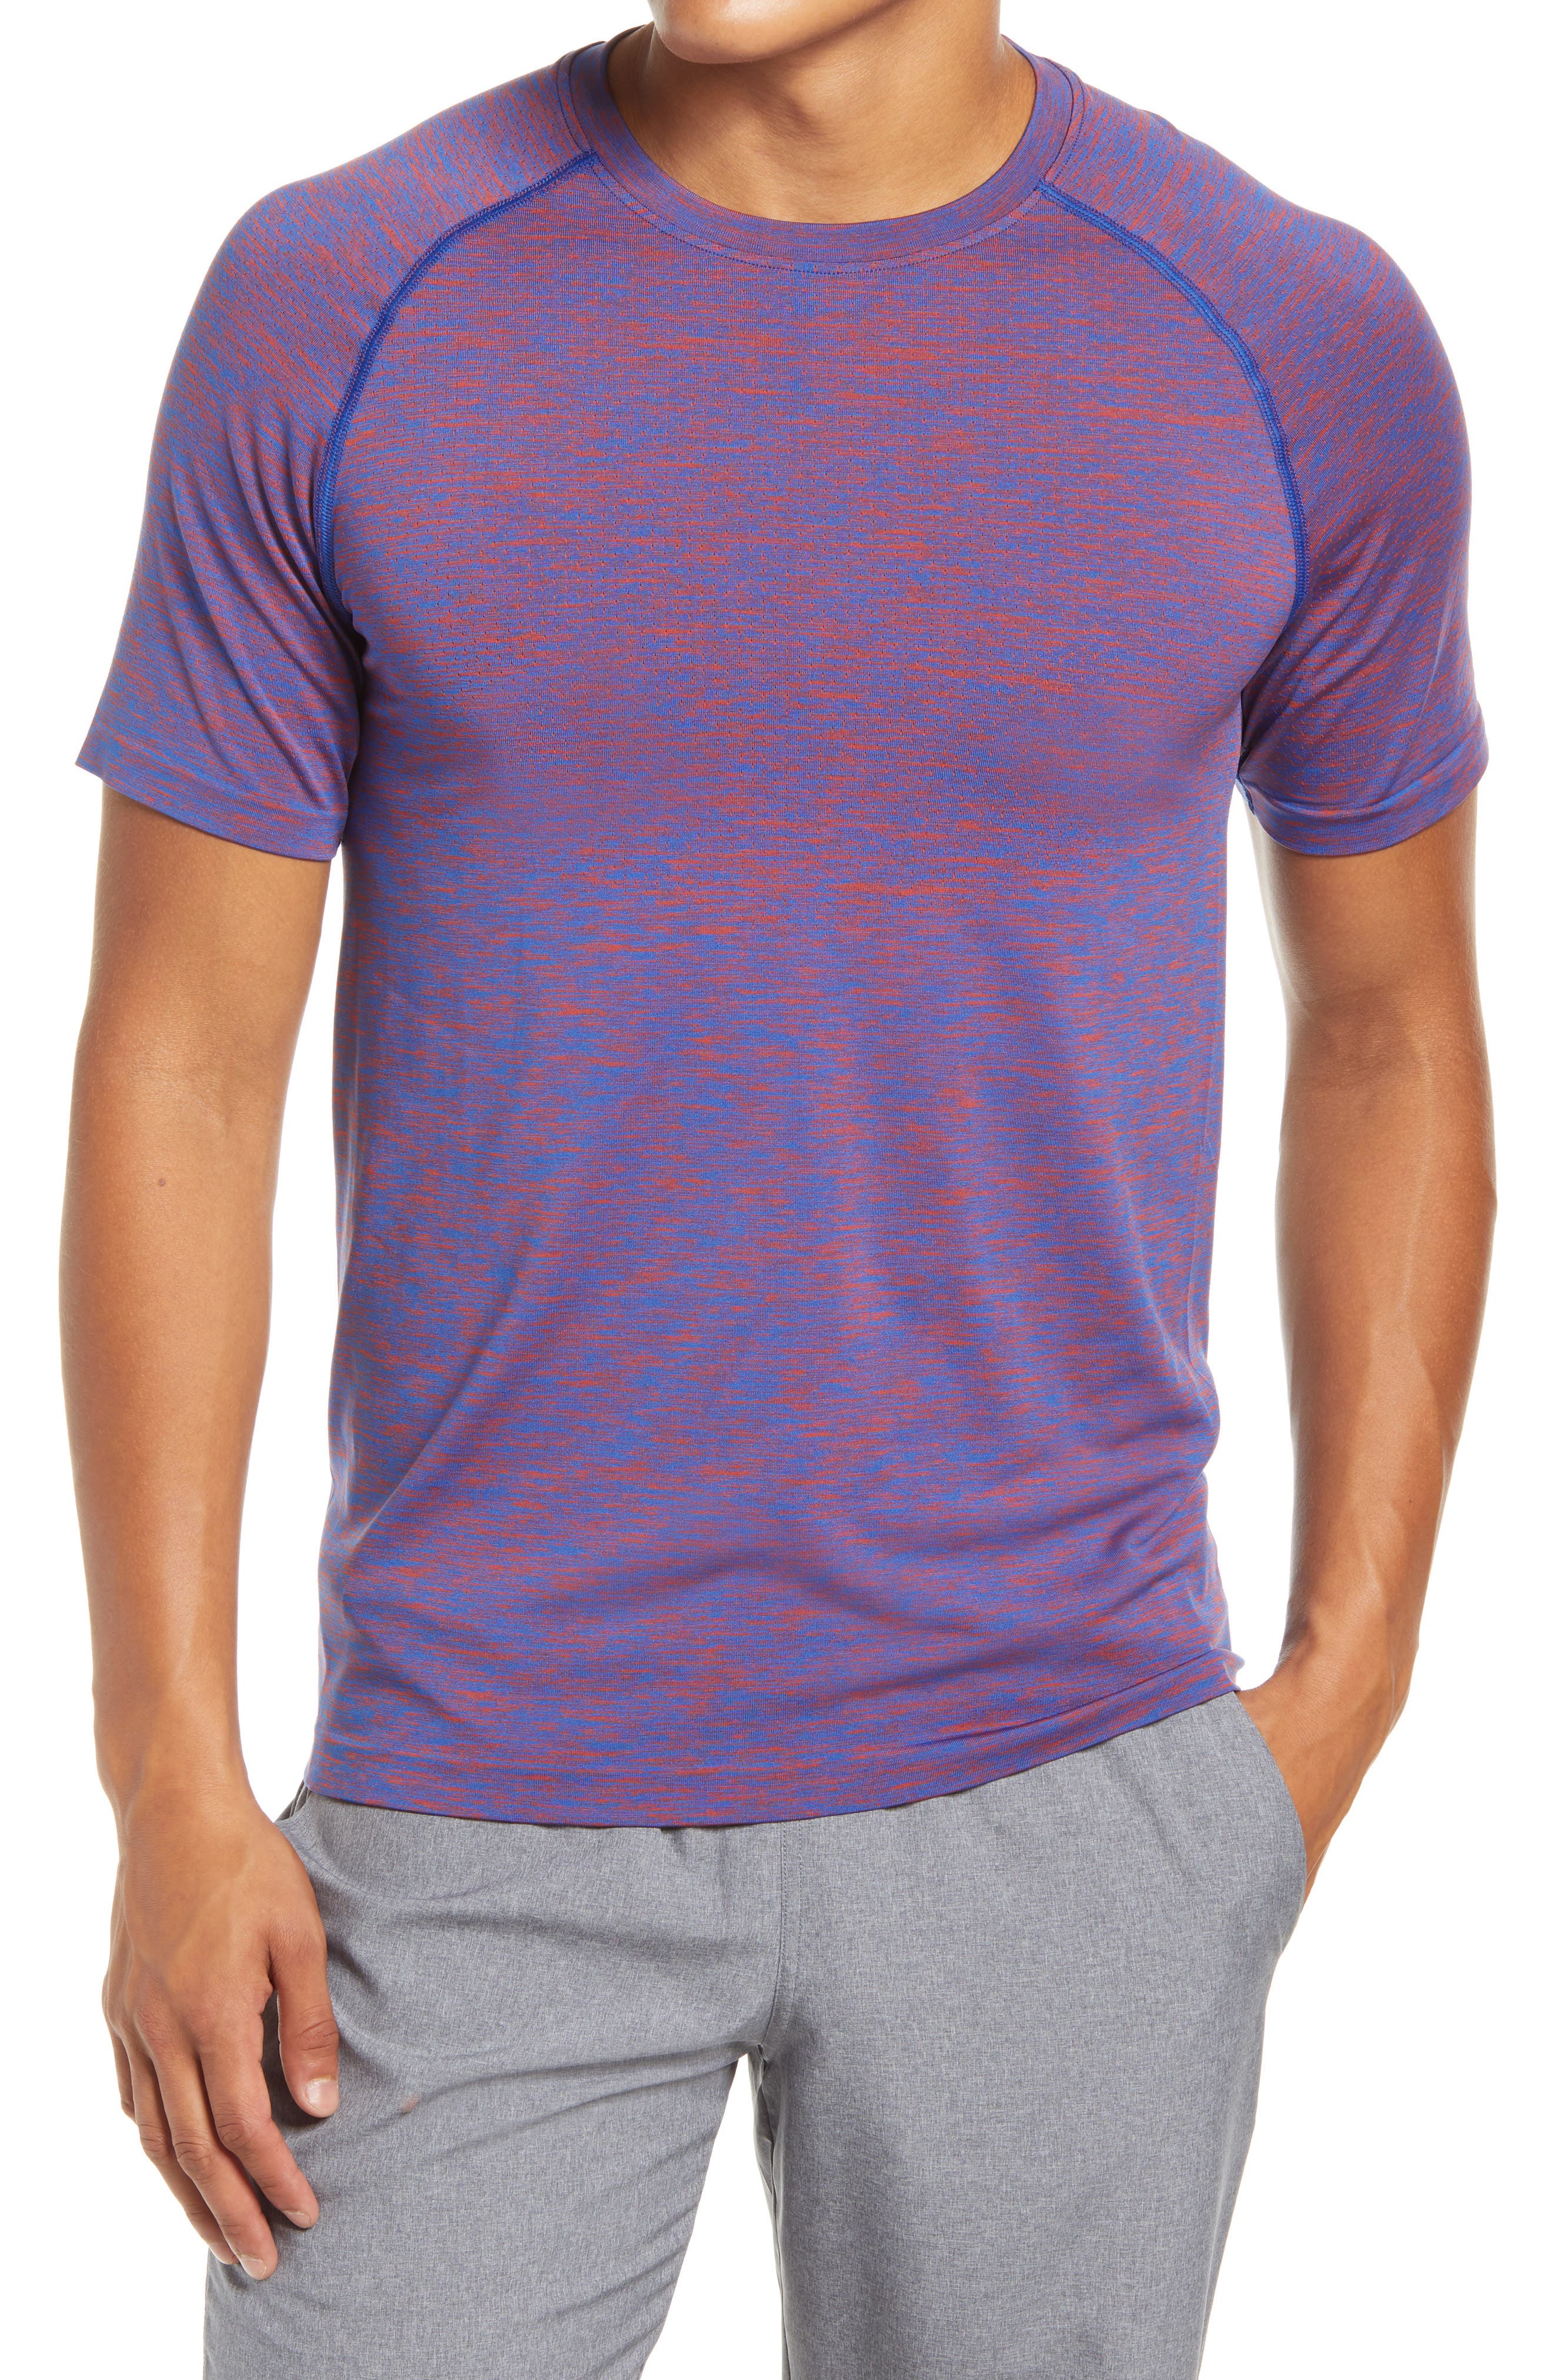 Rhone Reign Tech Perforated Yoke Training T-shirt In Mandred/midnightsaph